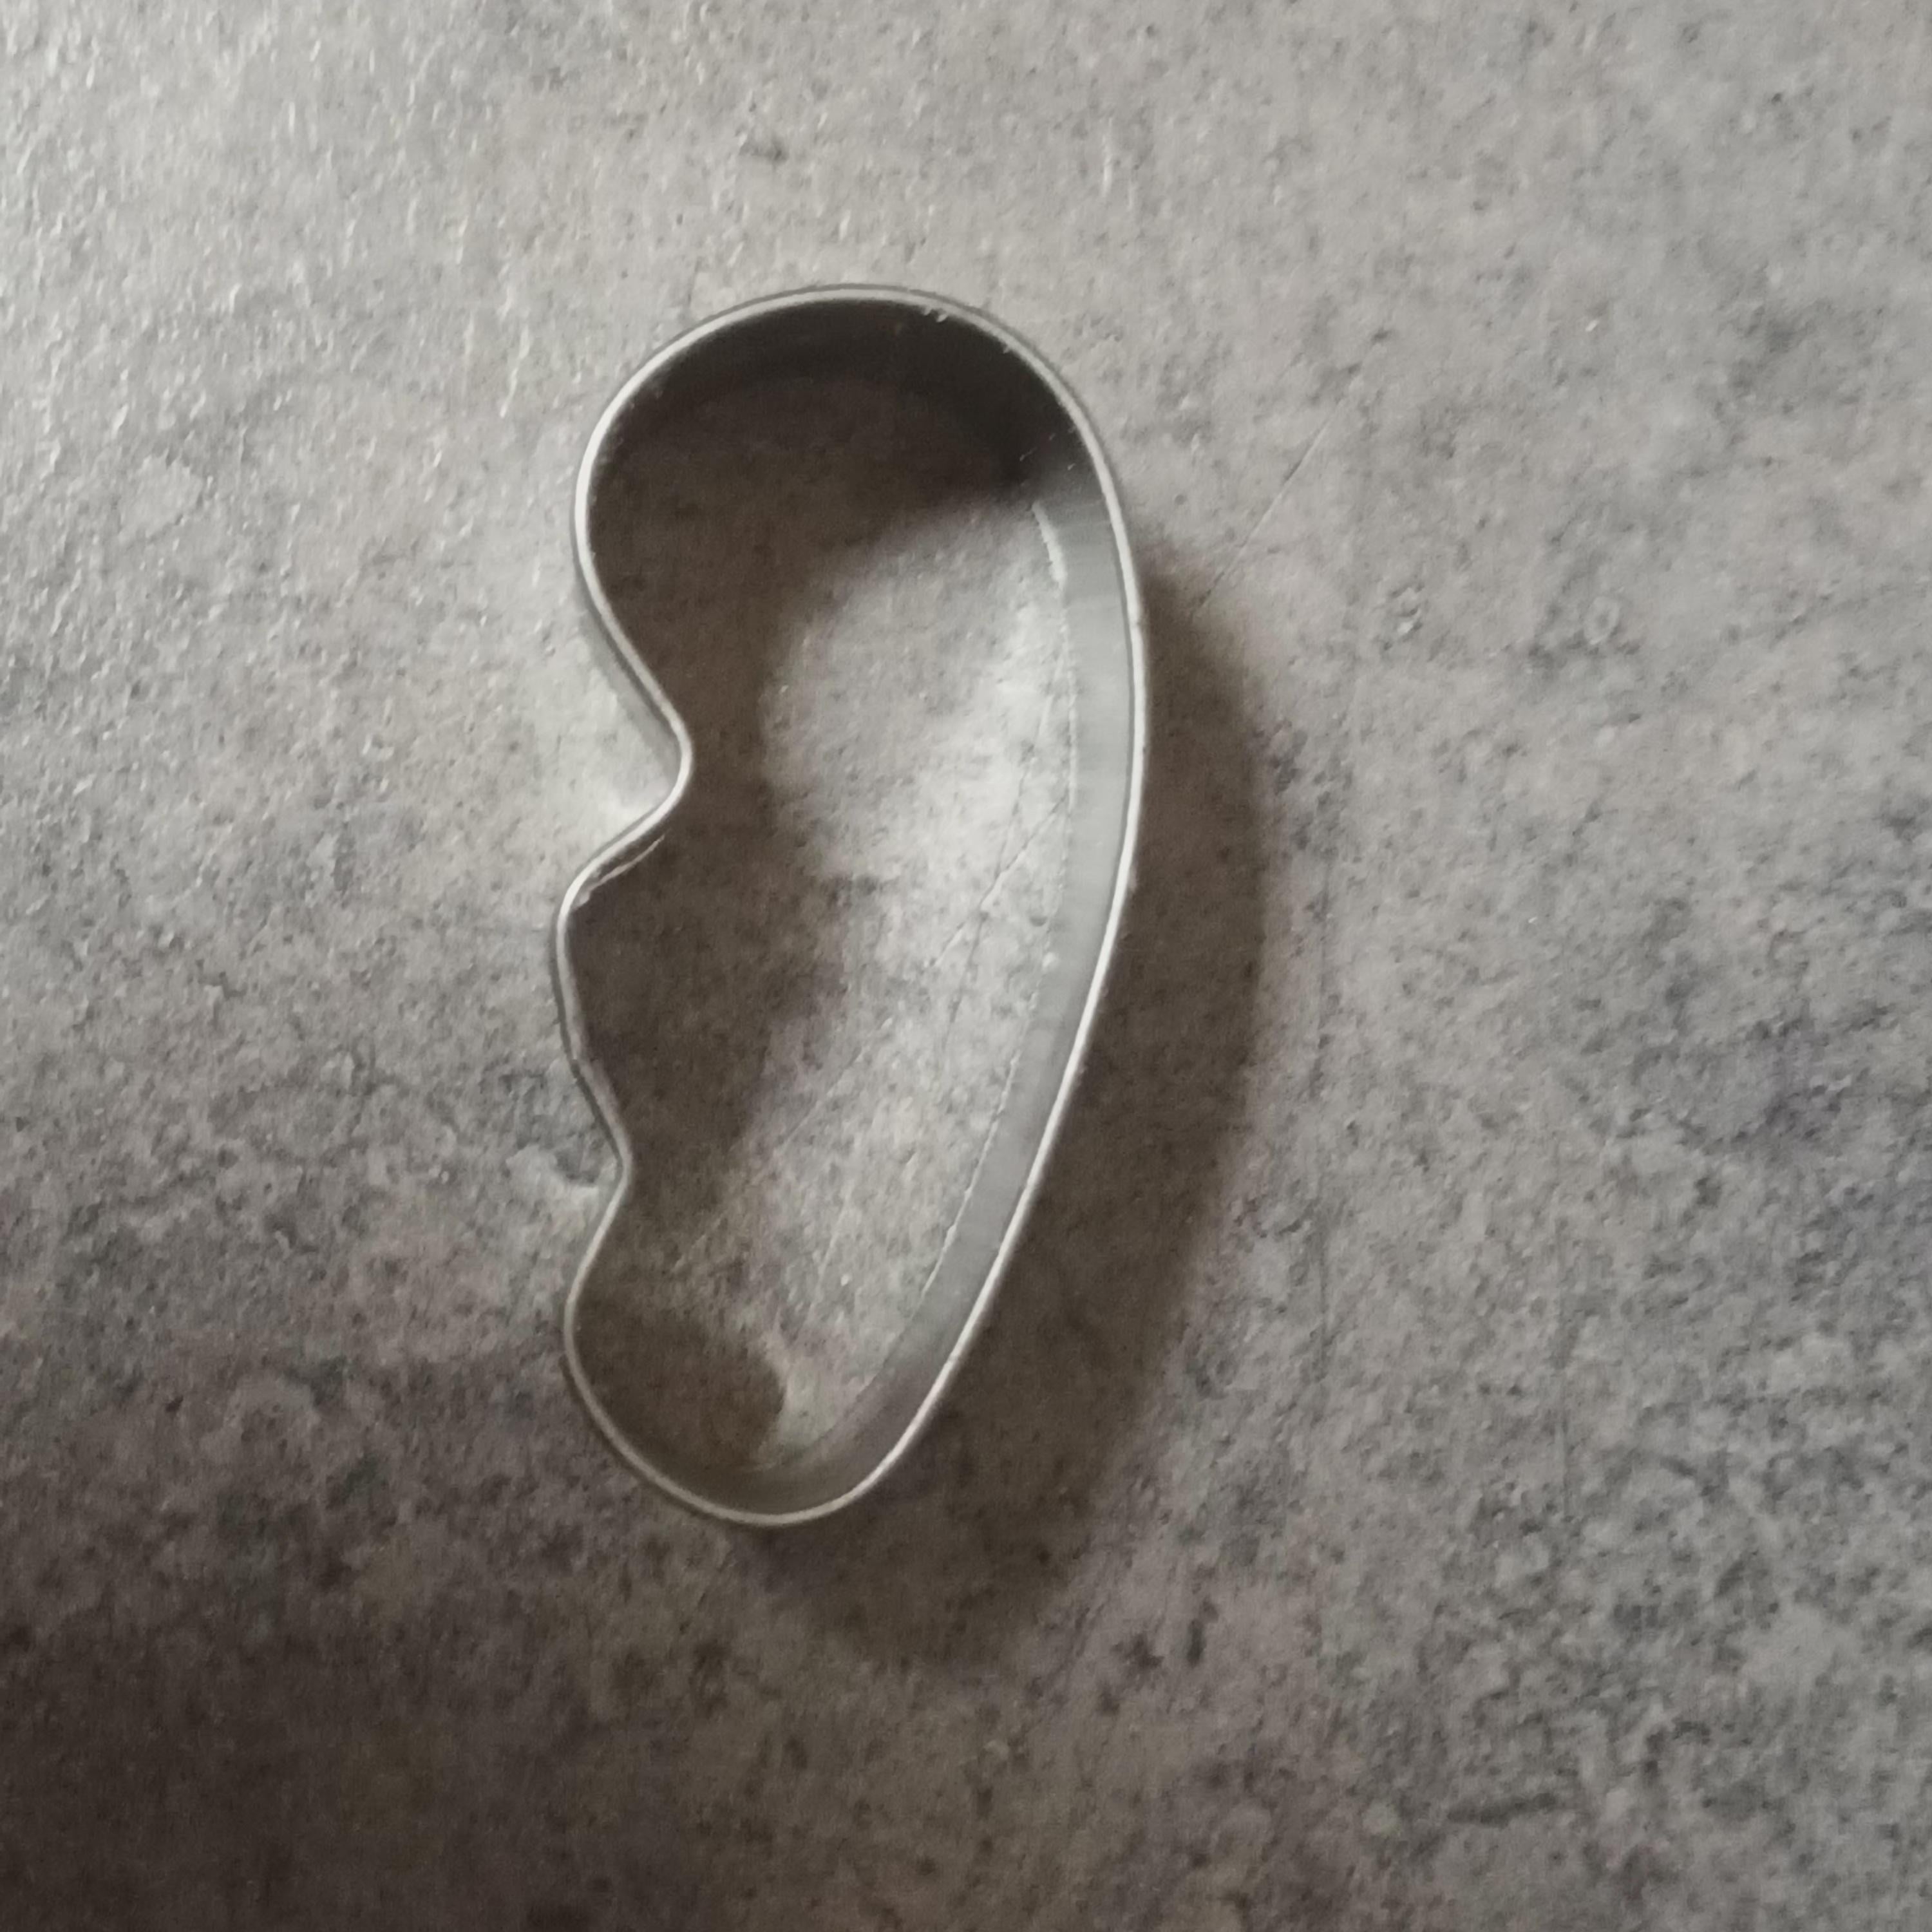 A cookie cutter that&#x27;s difficult to identify but could be an embryo or a lumpy peanut